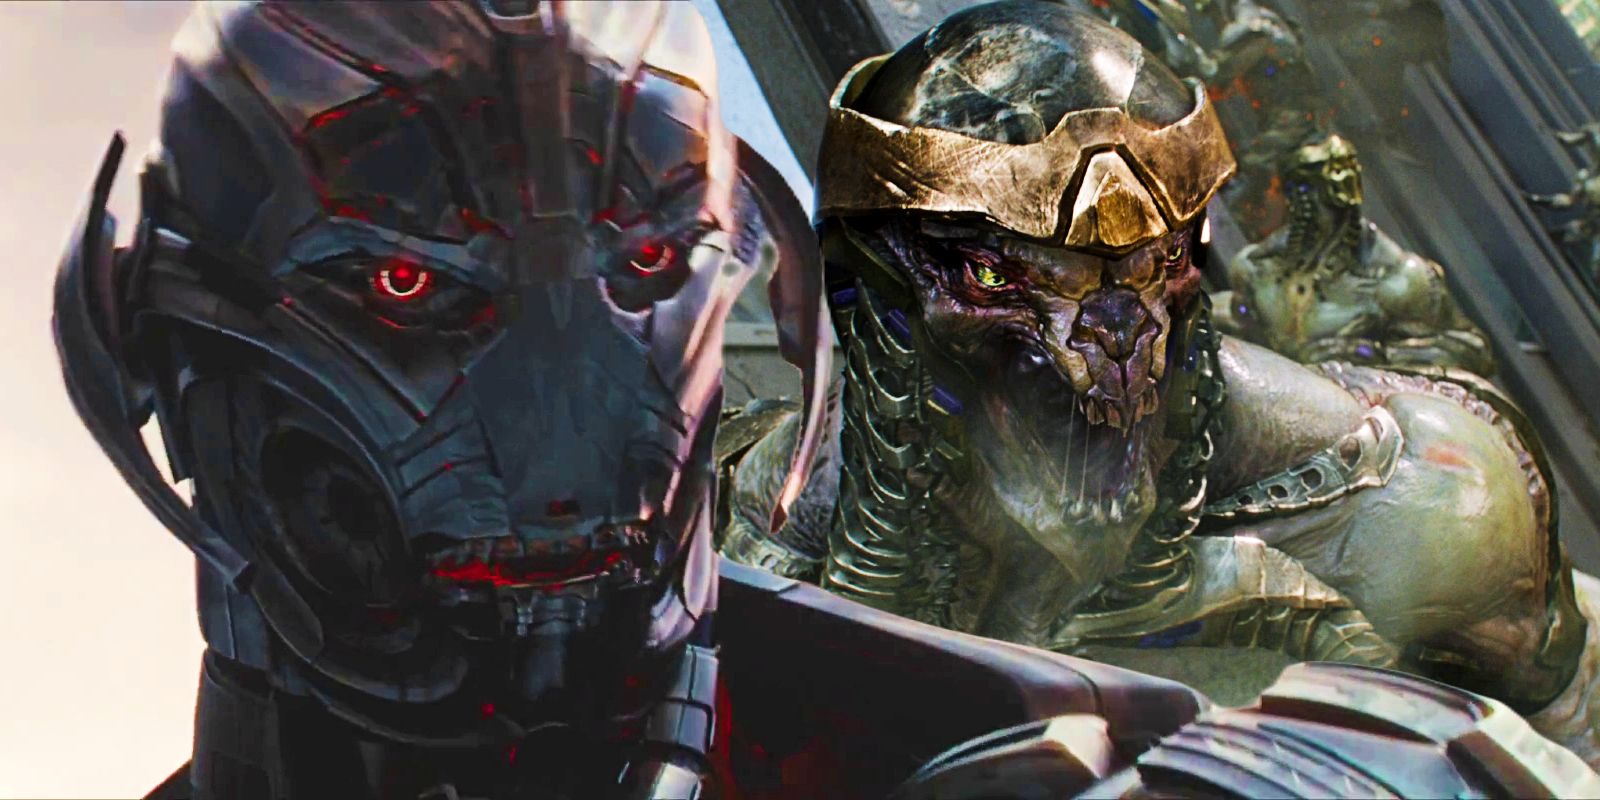 Ultron and the Chitauri in The Avengers